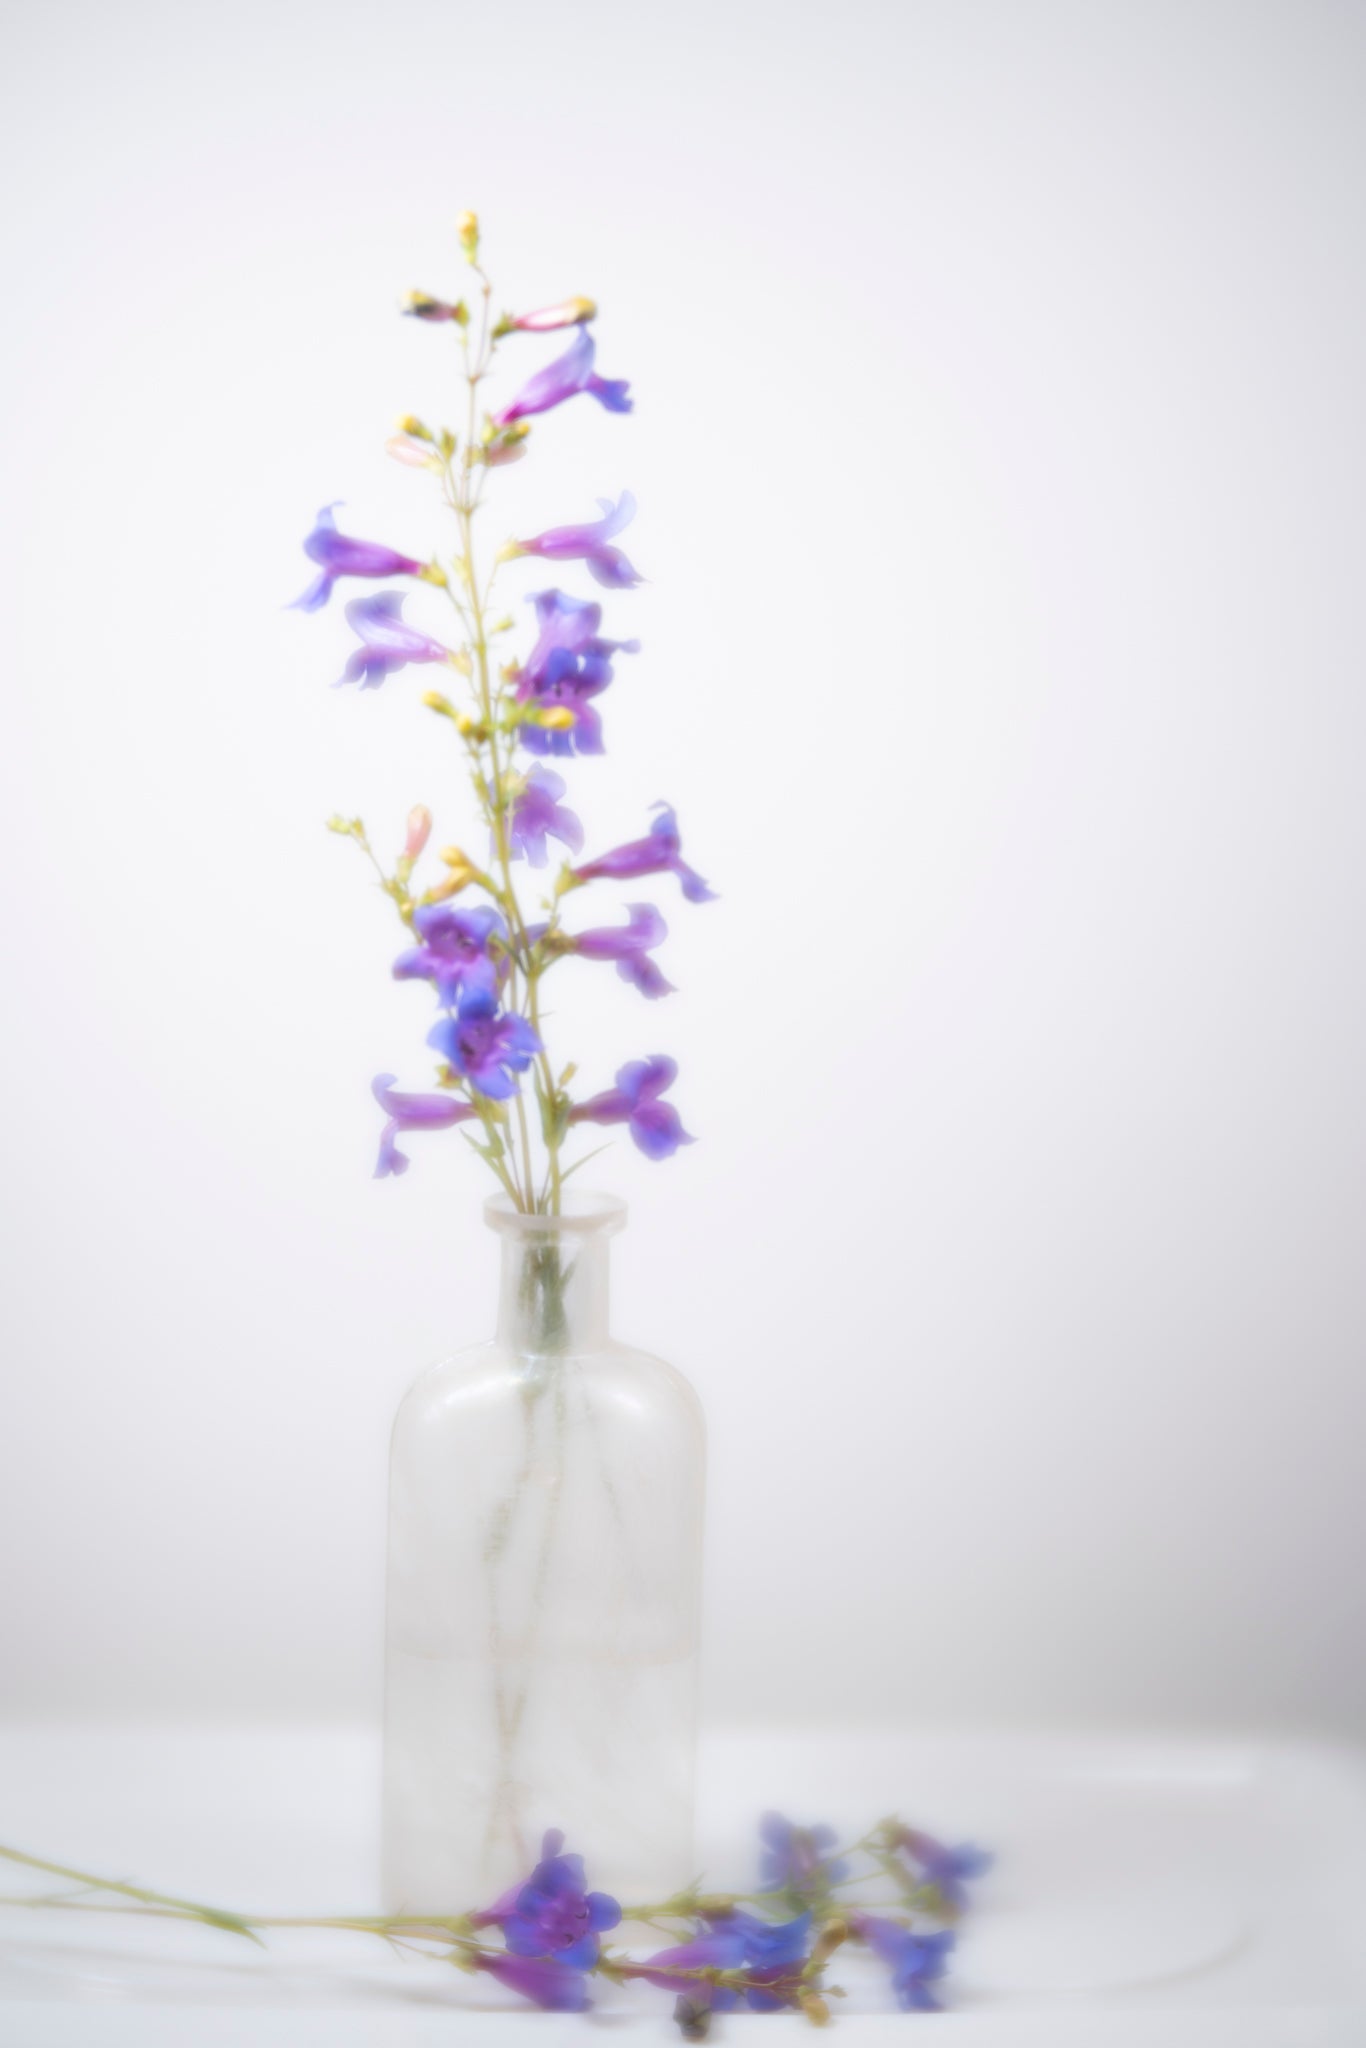 Fine art photograph of wildflowers in a jar by Cameron Dreaux. 